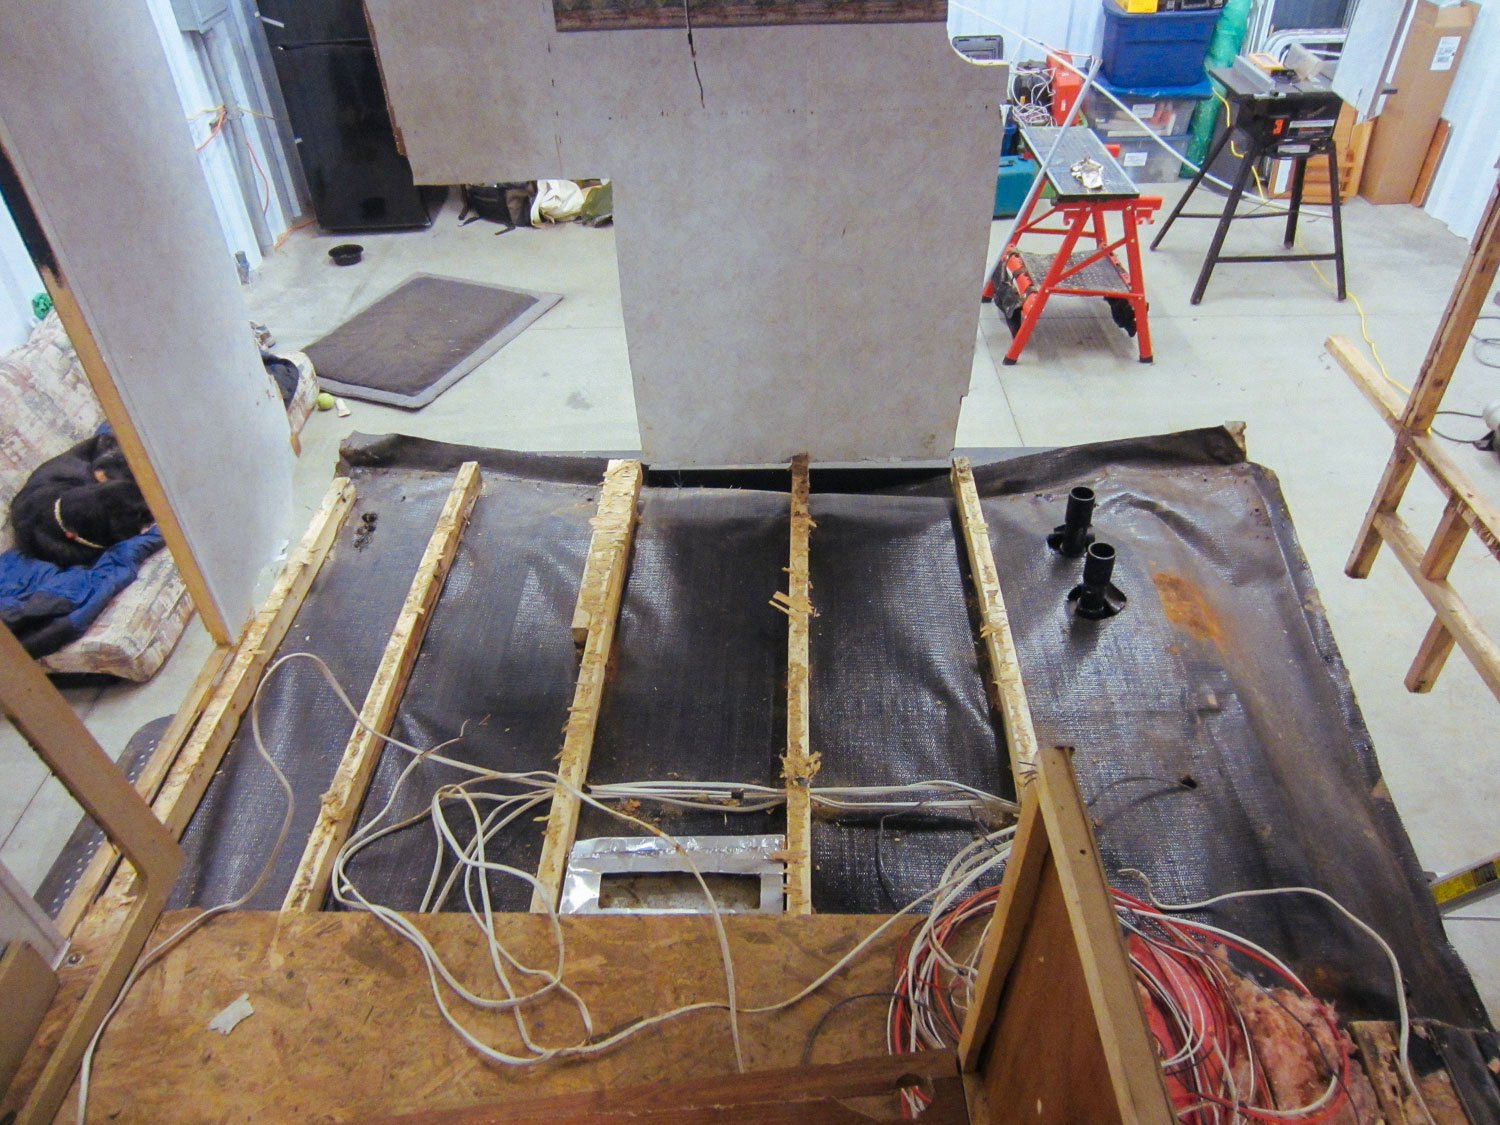  The kitchen sub-floor had to be ripped out due to water damage. 